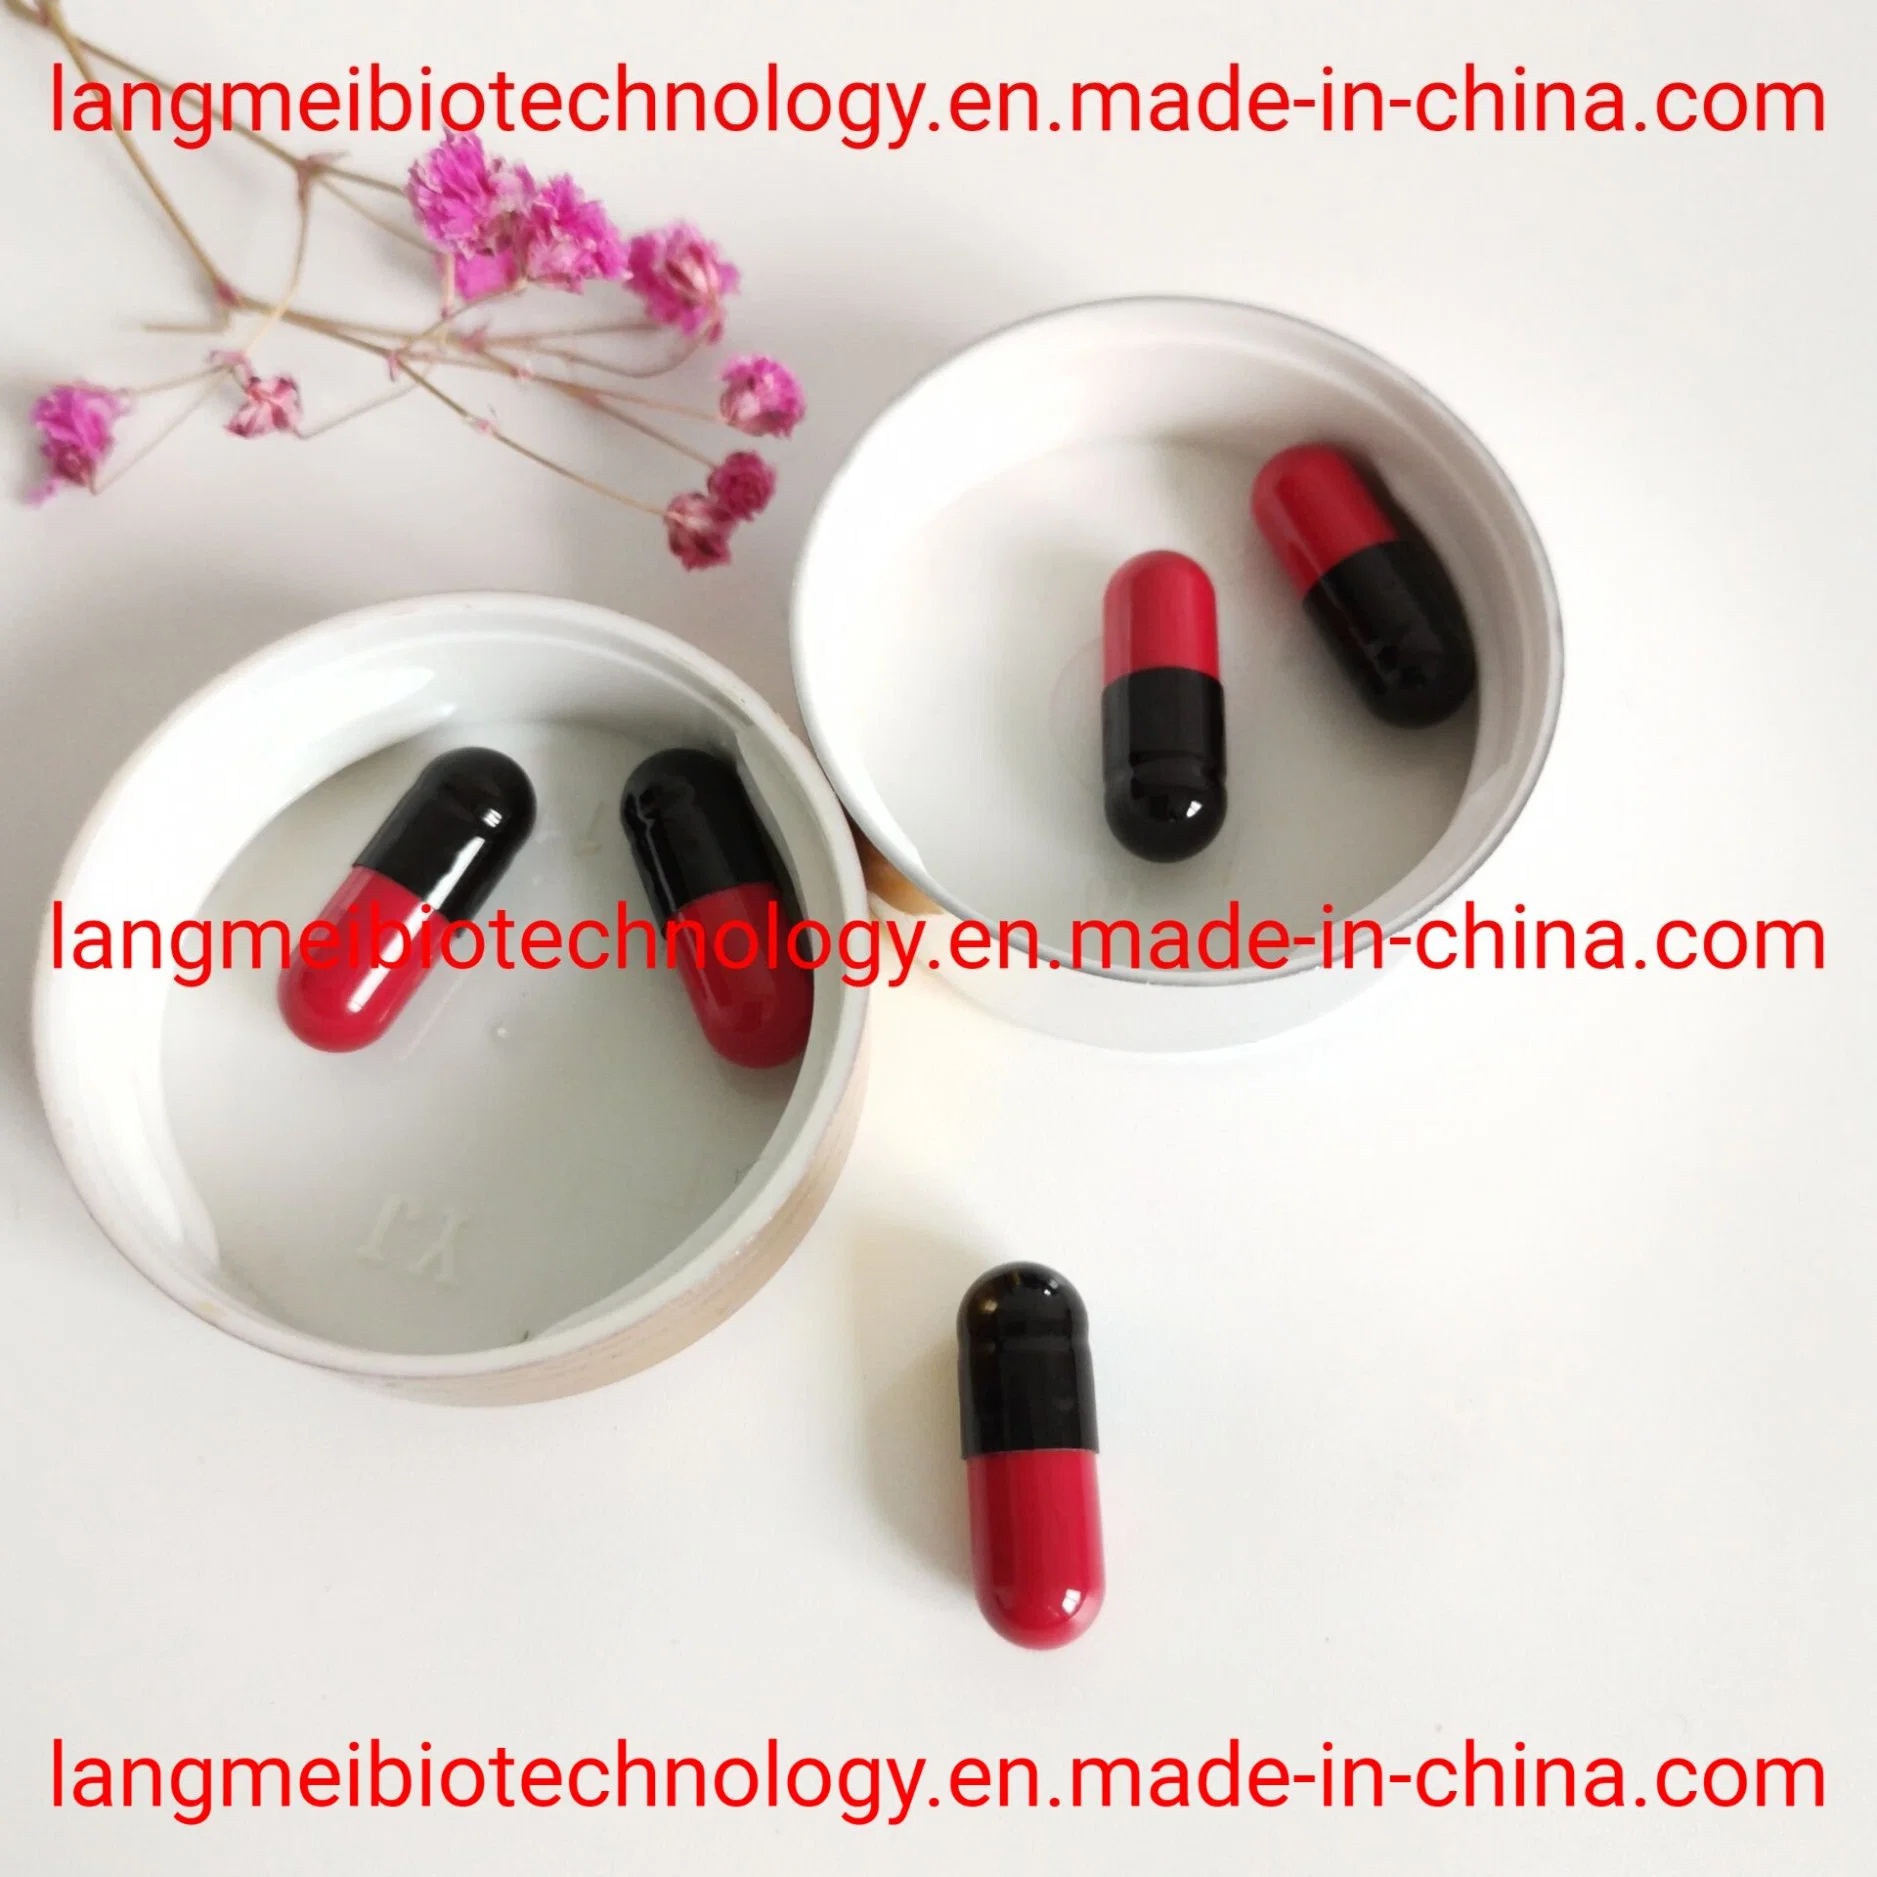 Increase Satiety Diet Supplement Slimming Capsules Chinese Weight Loss Pills OEM Private Label